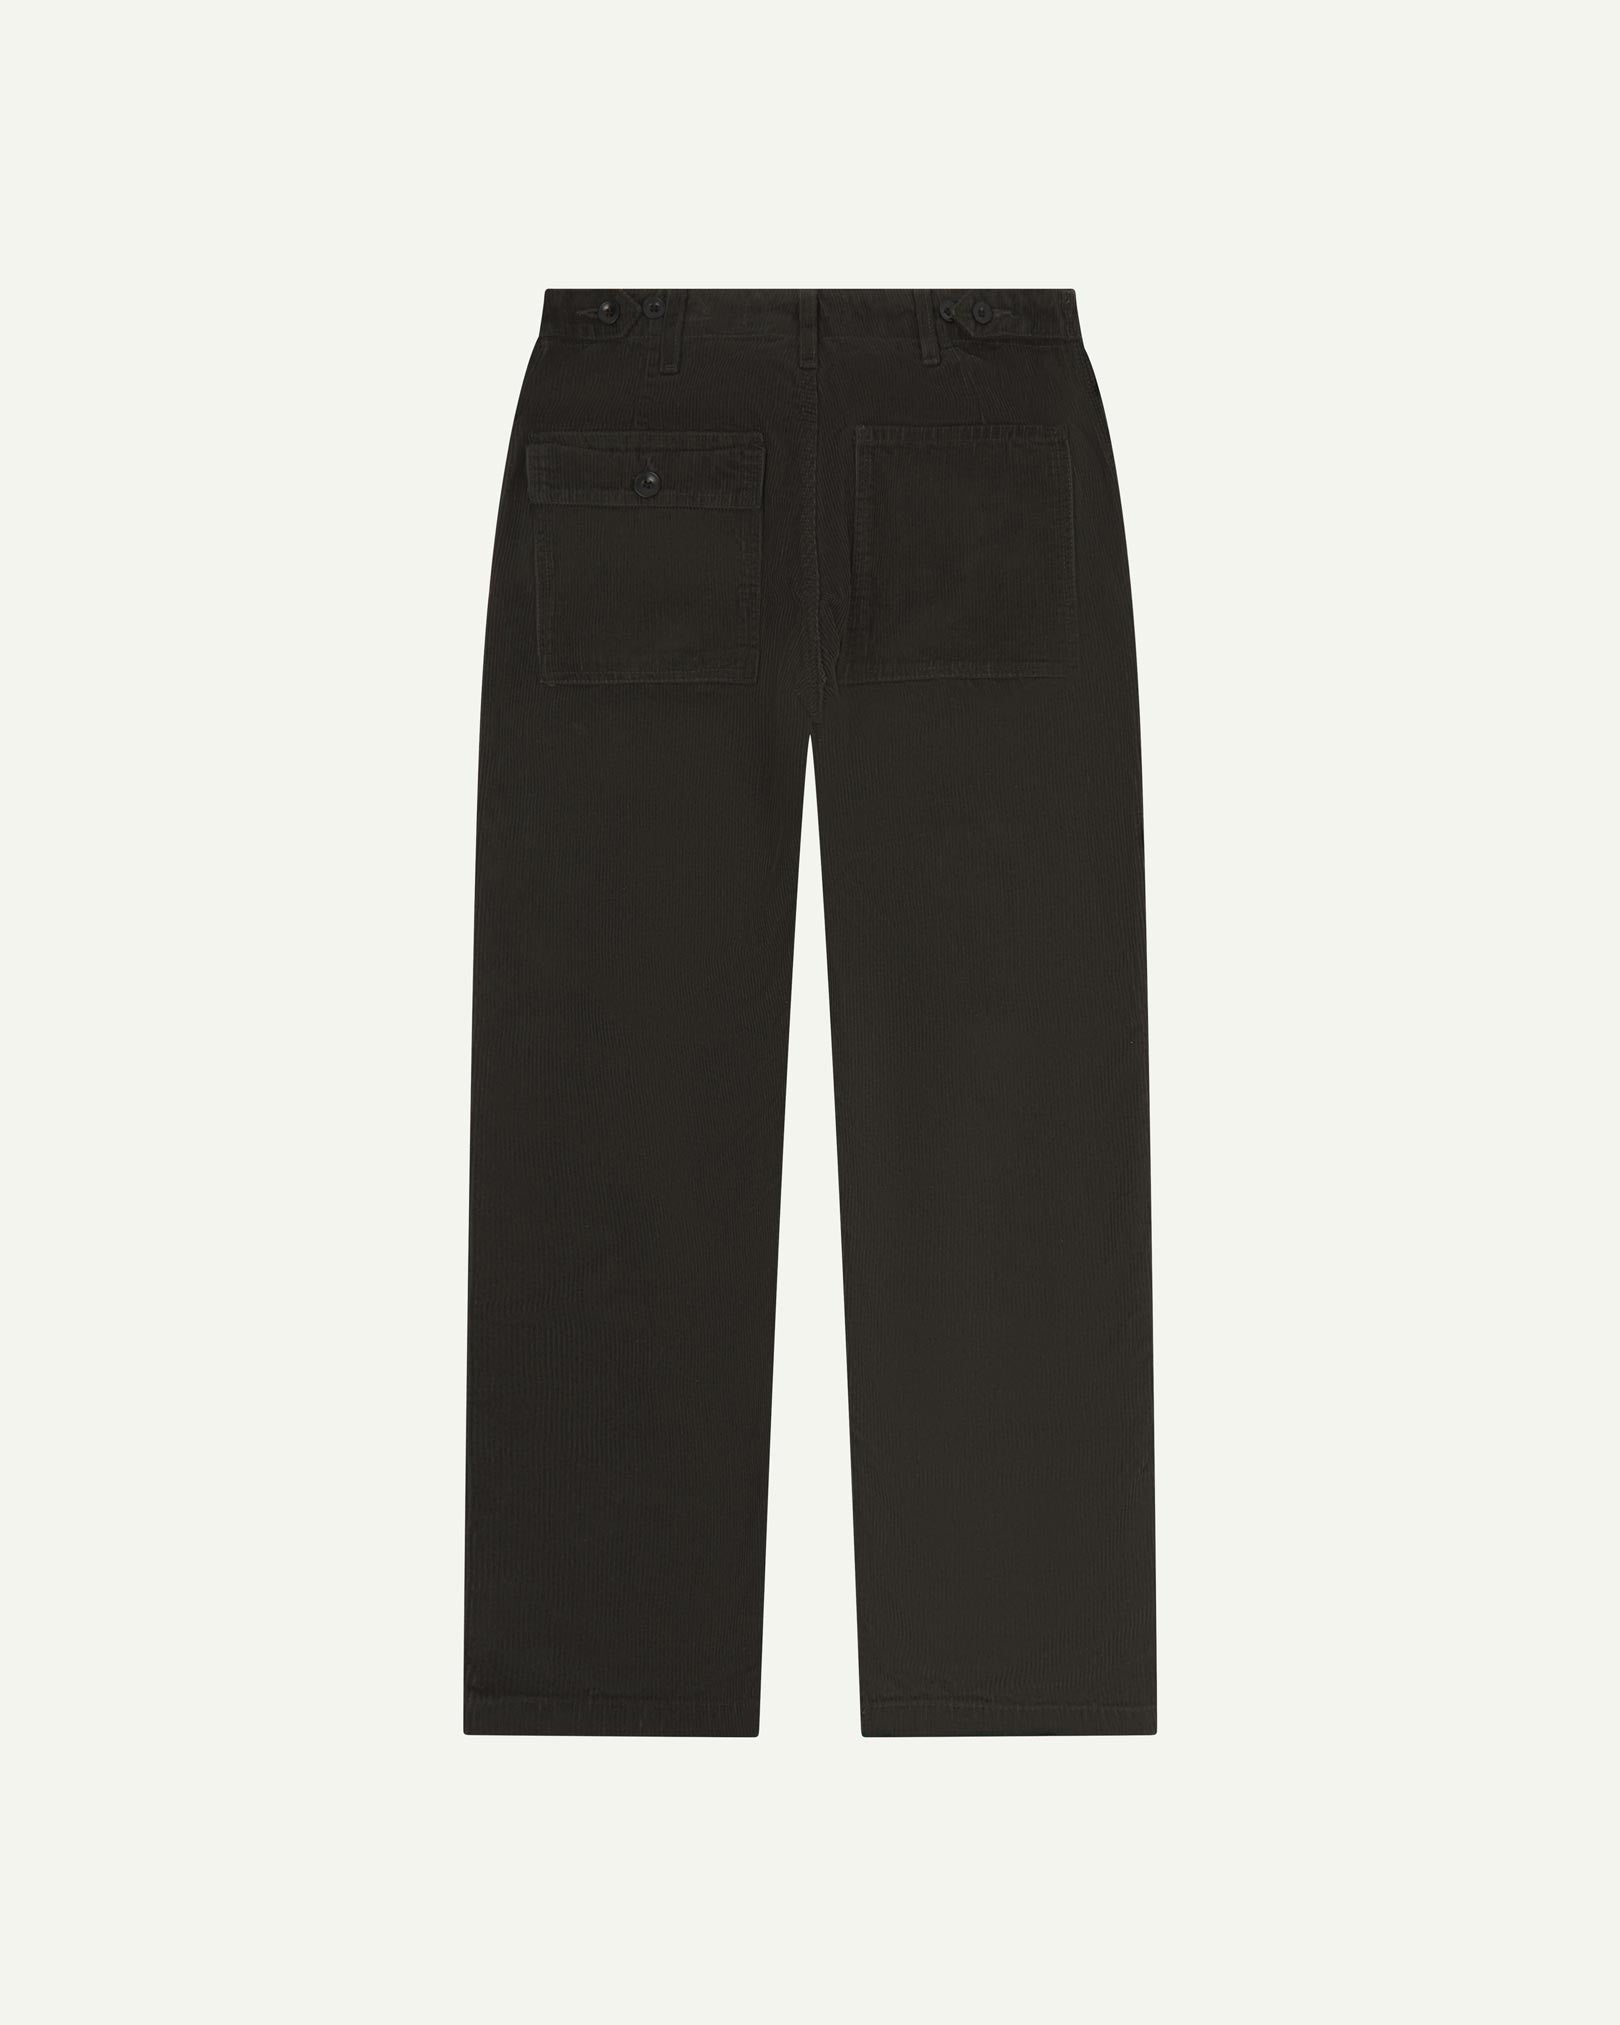 Full length back-view of faded black corduroy 5005 trousers with view of rear pockets, belt loops and tapered leg fit.